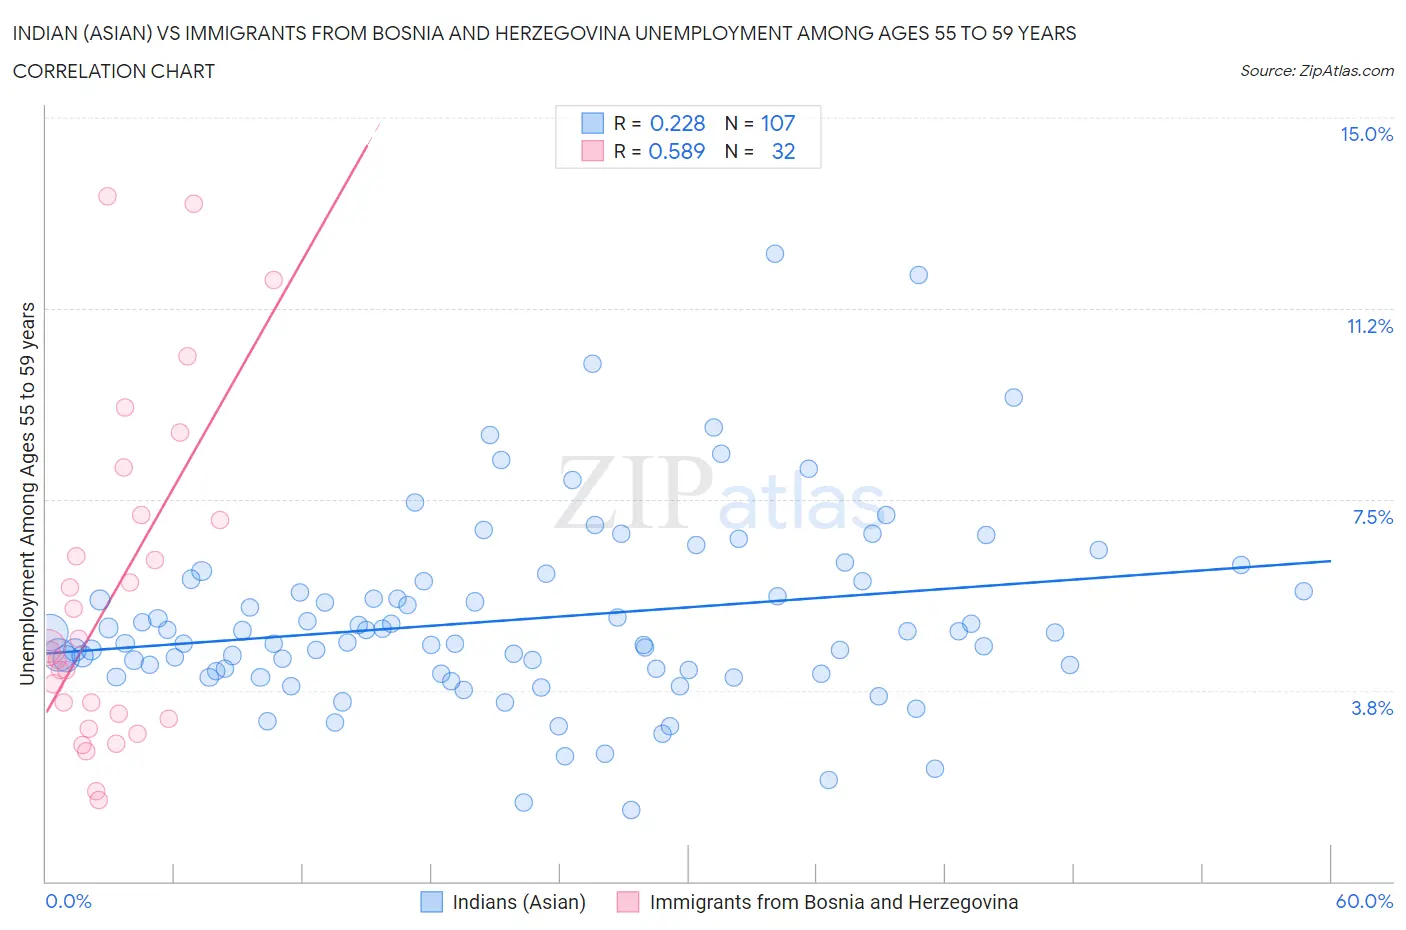 Indian (Asian) vs Immigrants from Bosnia and Herzegovina Unemployment Among Ages 55 to 59 years